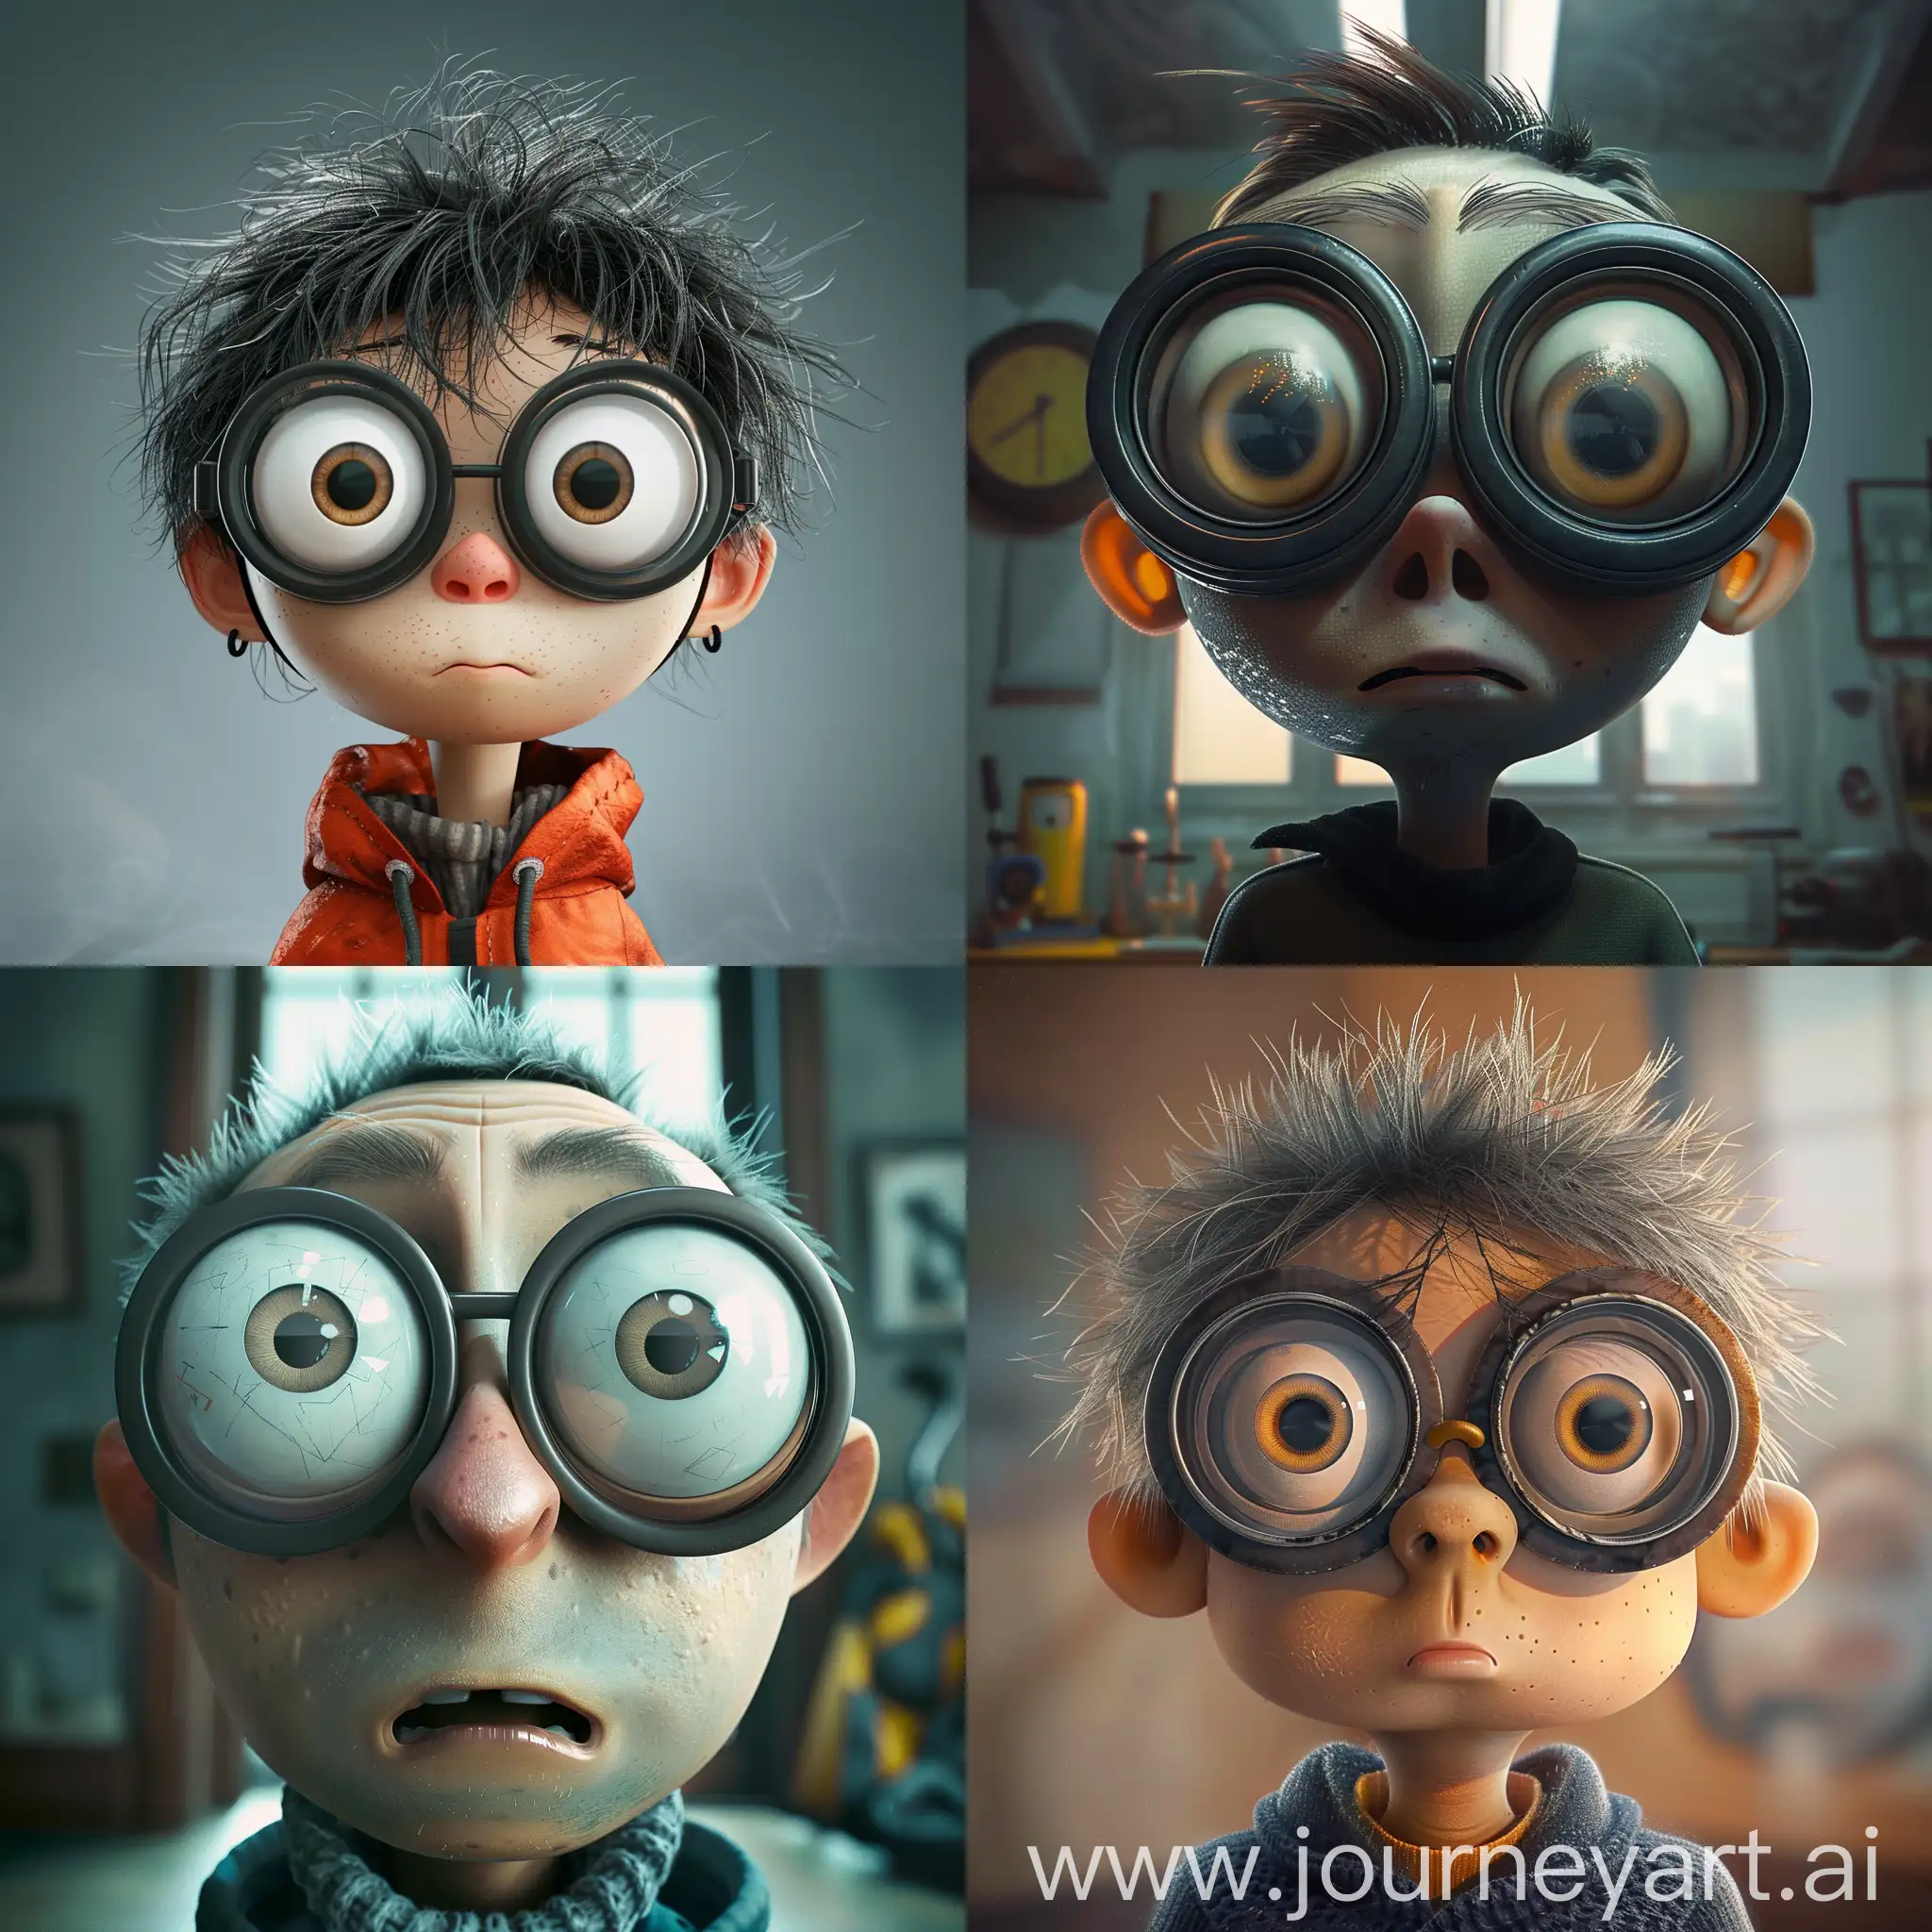 Eccentric-Programmer-with-Oversized-Glasses-Quirky-Pixar-Style-Portrait